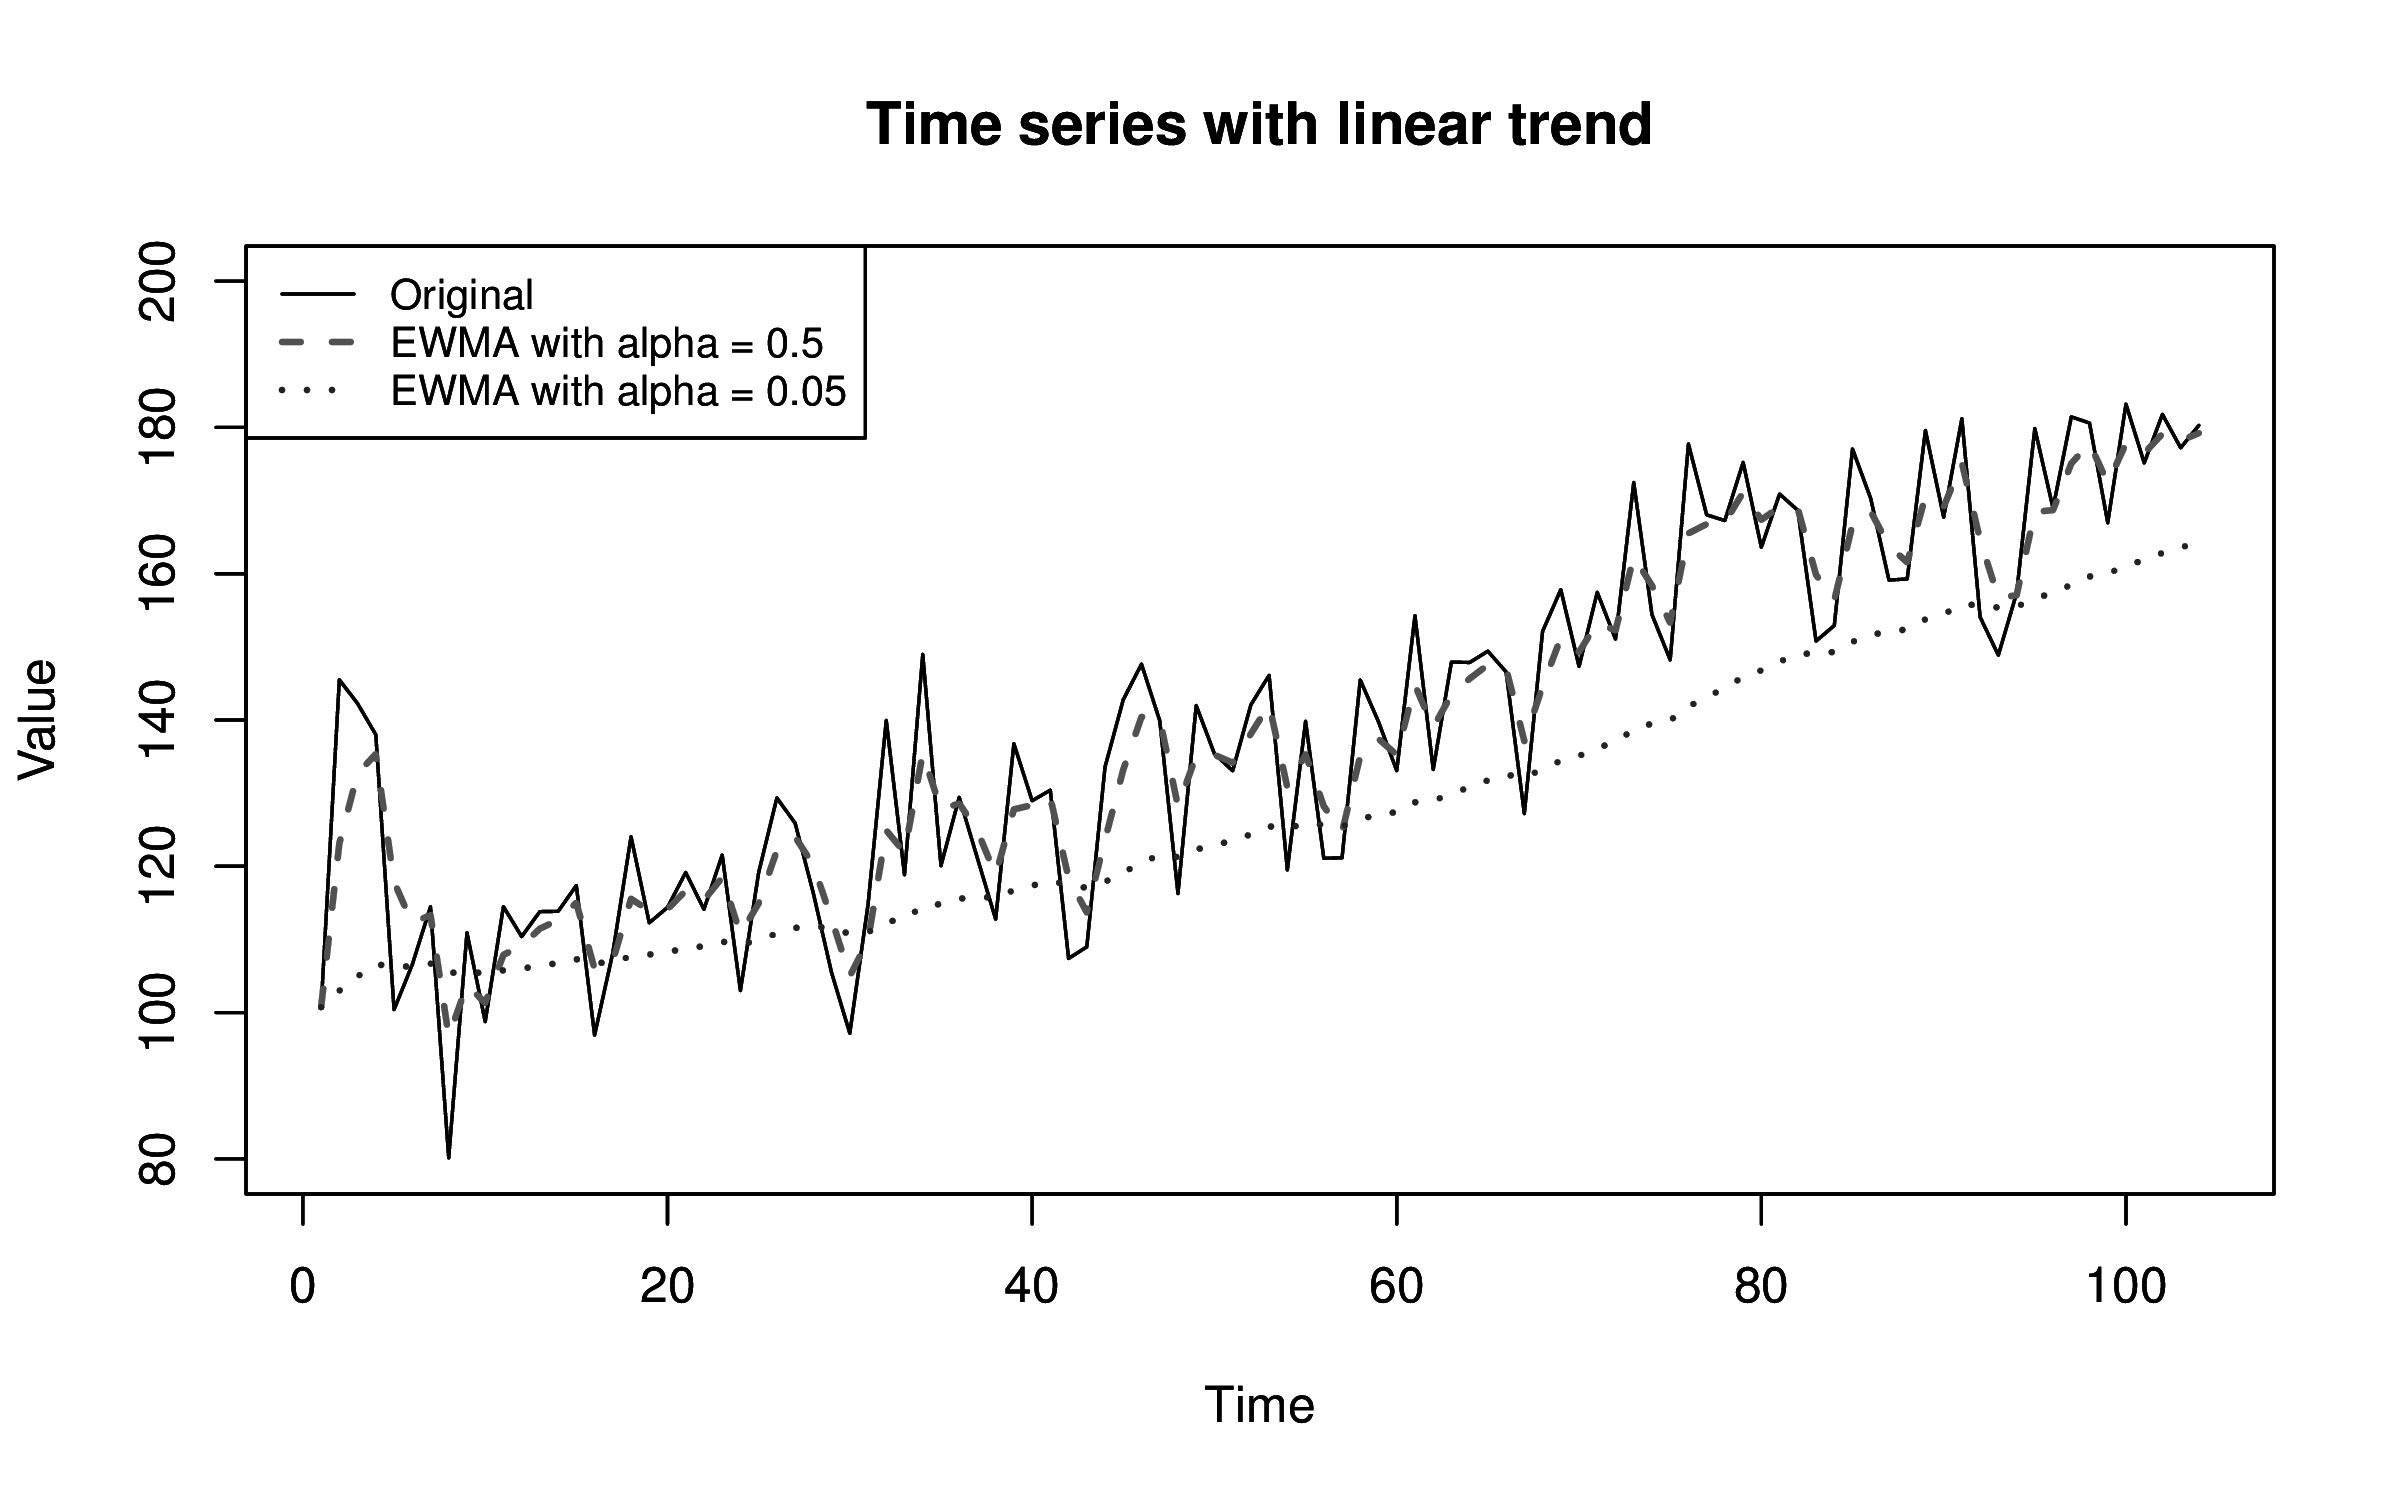 plots/output/exponential_smoothing/trend_time_series.png